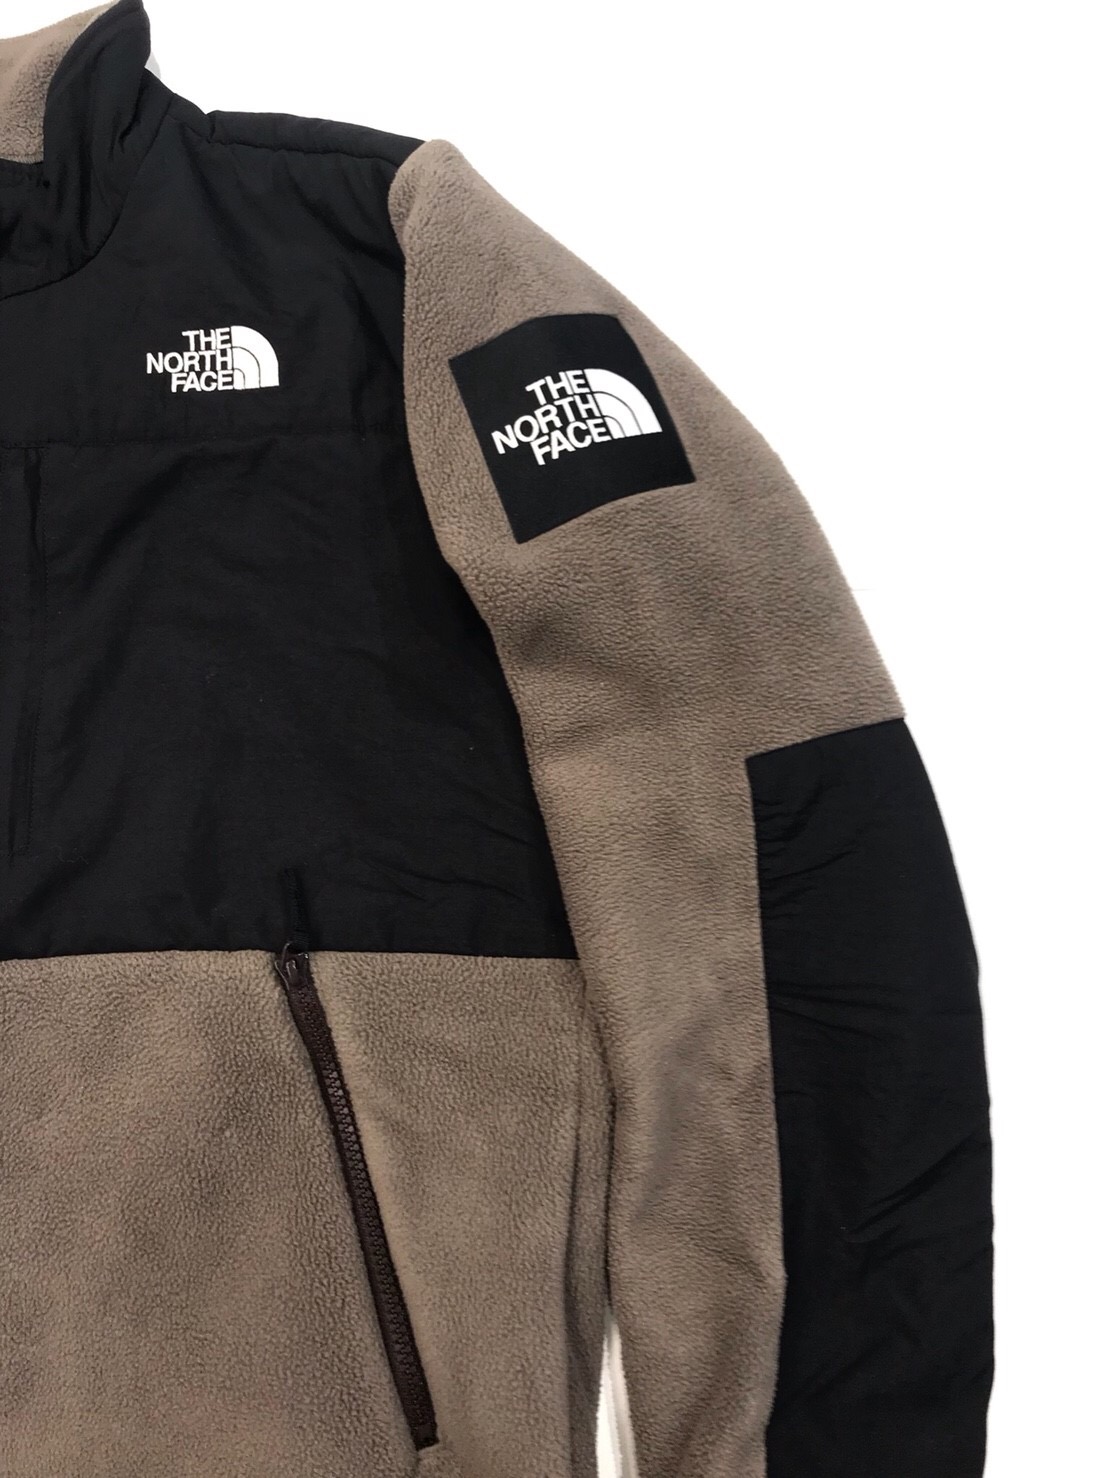 THE NORTH FACE﻿﻿